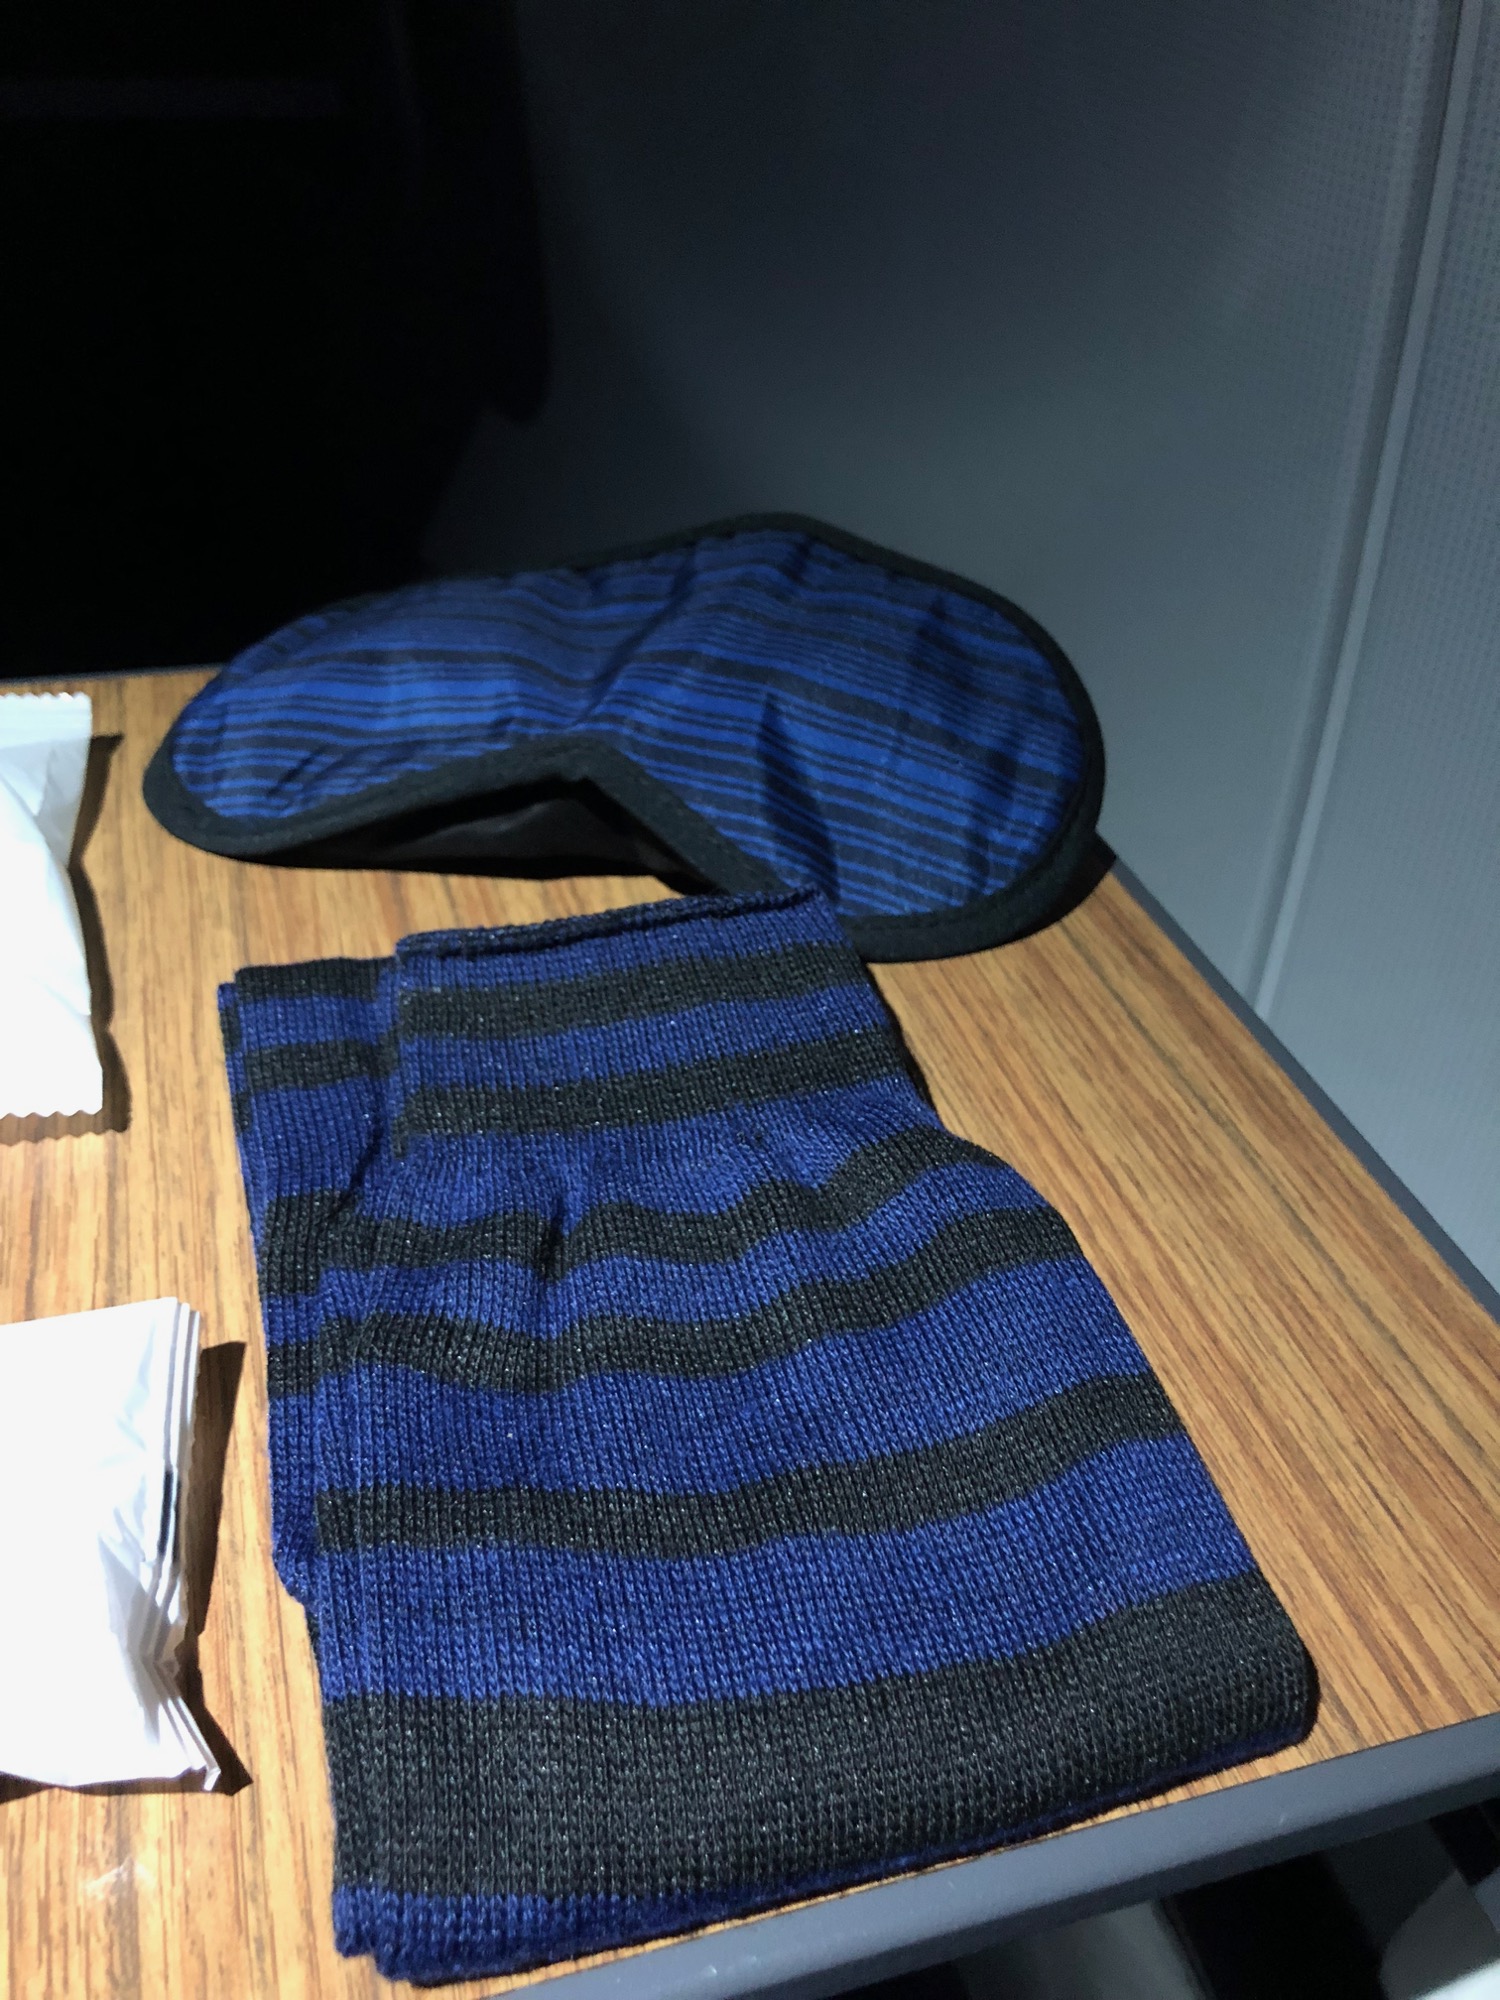 a pair of blue and black striped socks on a table